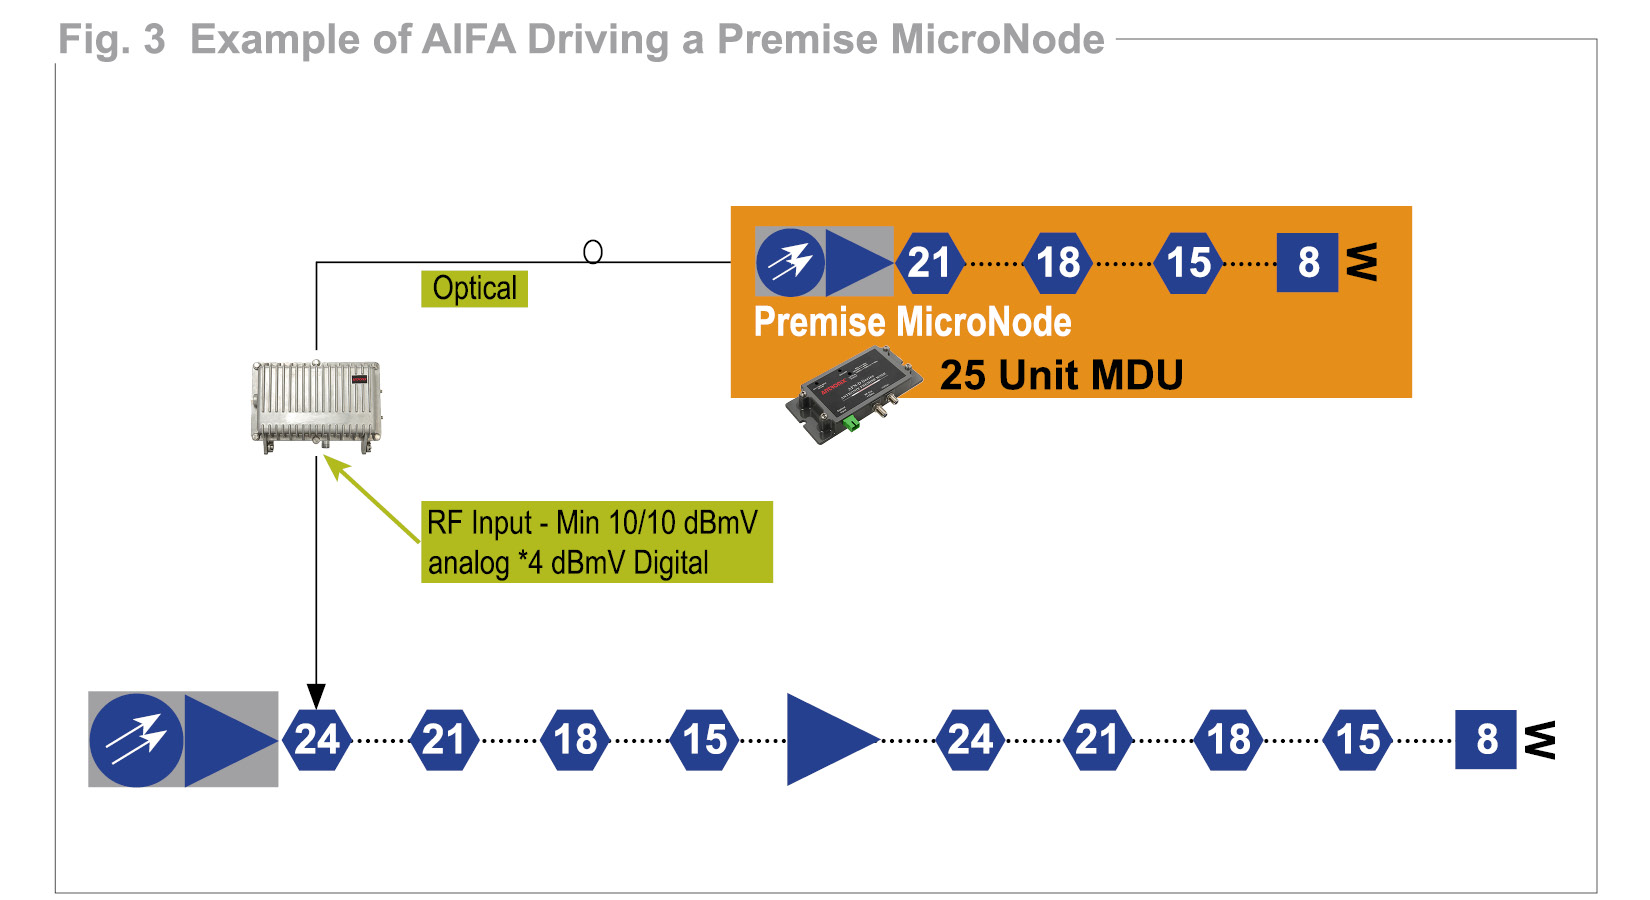 Example of AIFA driving a premise micronode infographic